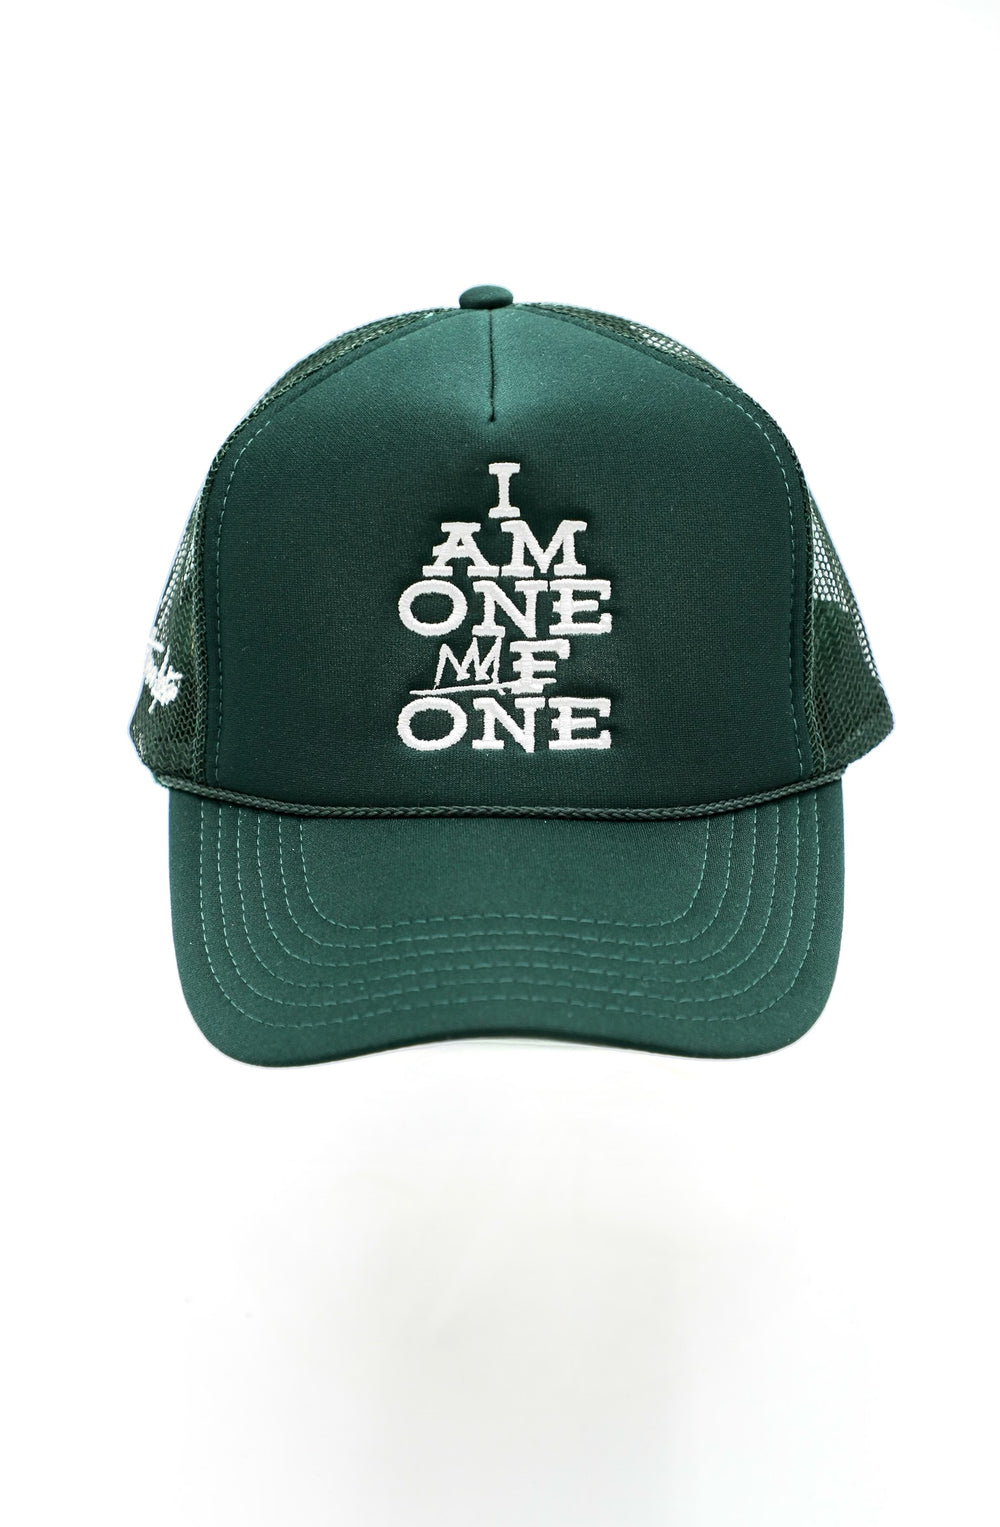 I AM ONE OF ONE - Forest Green